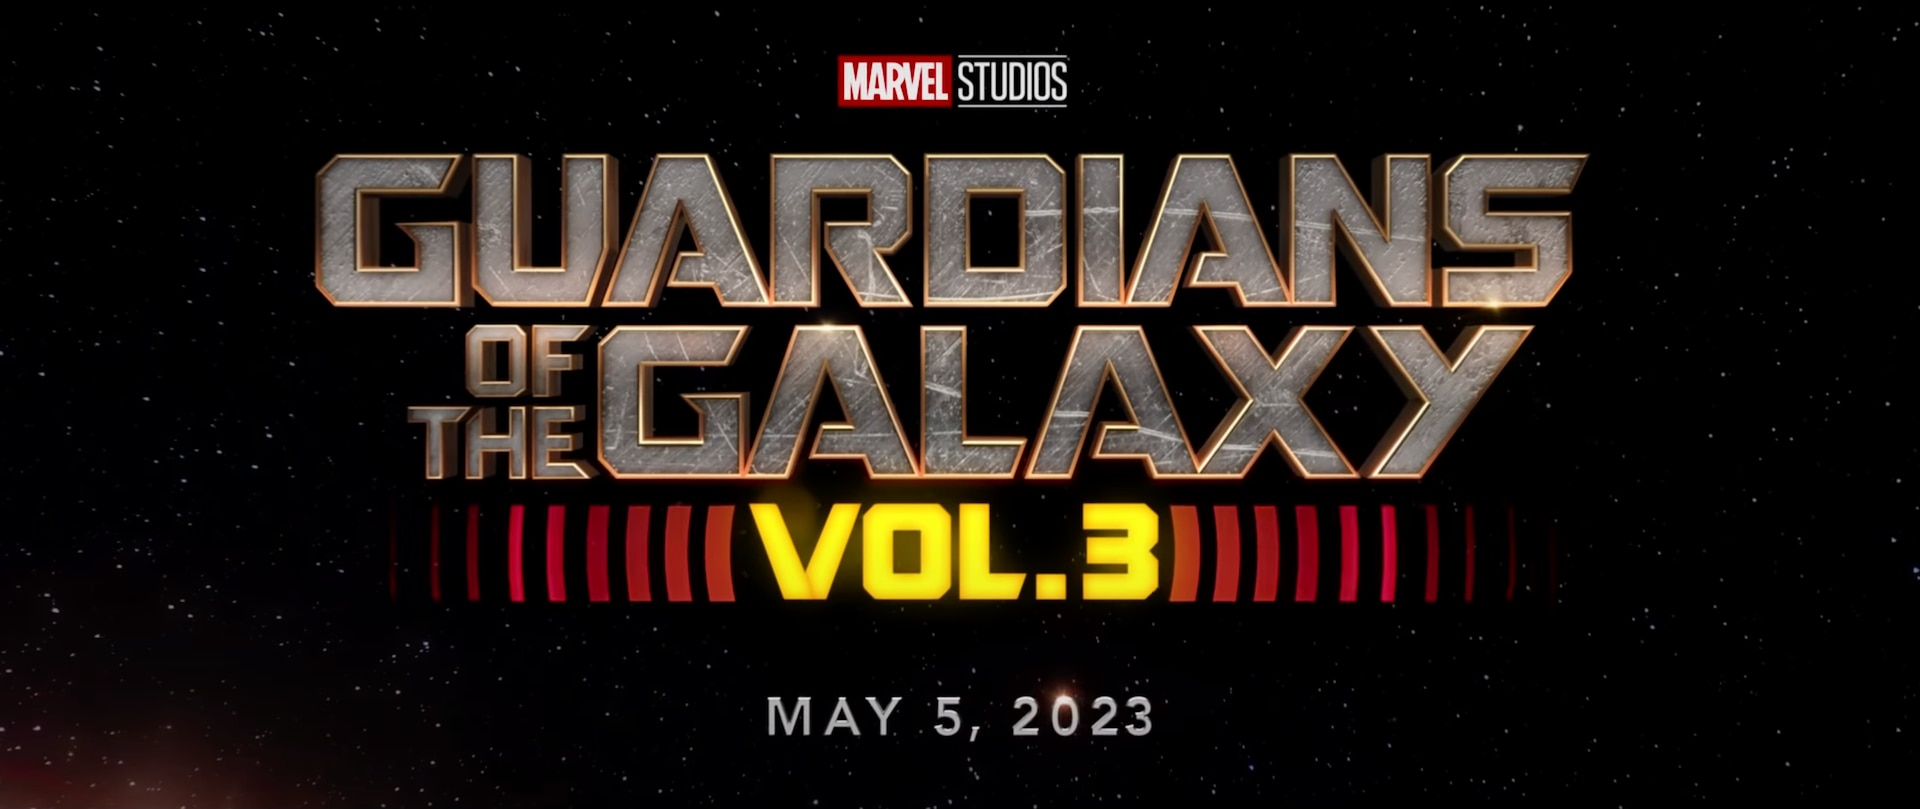 Guardians of the Galaxy Vol. 3 (2023)